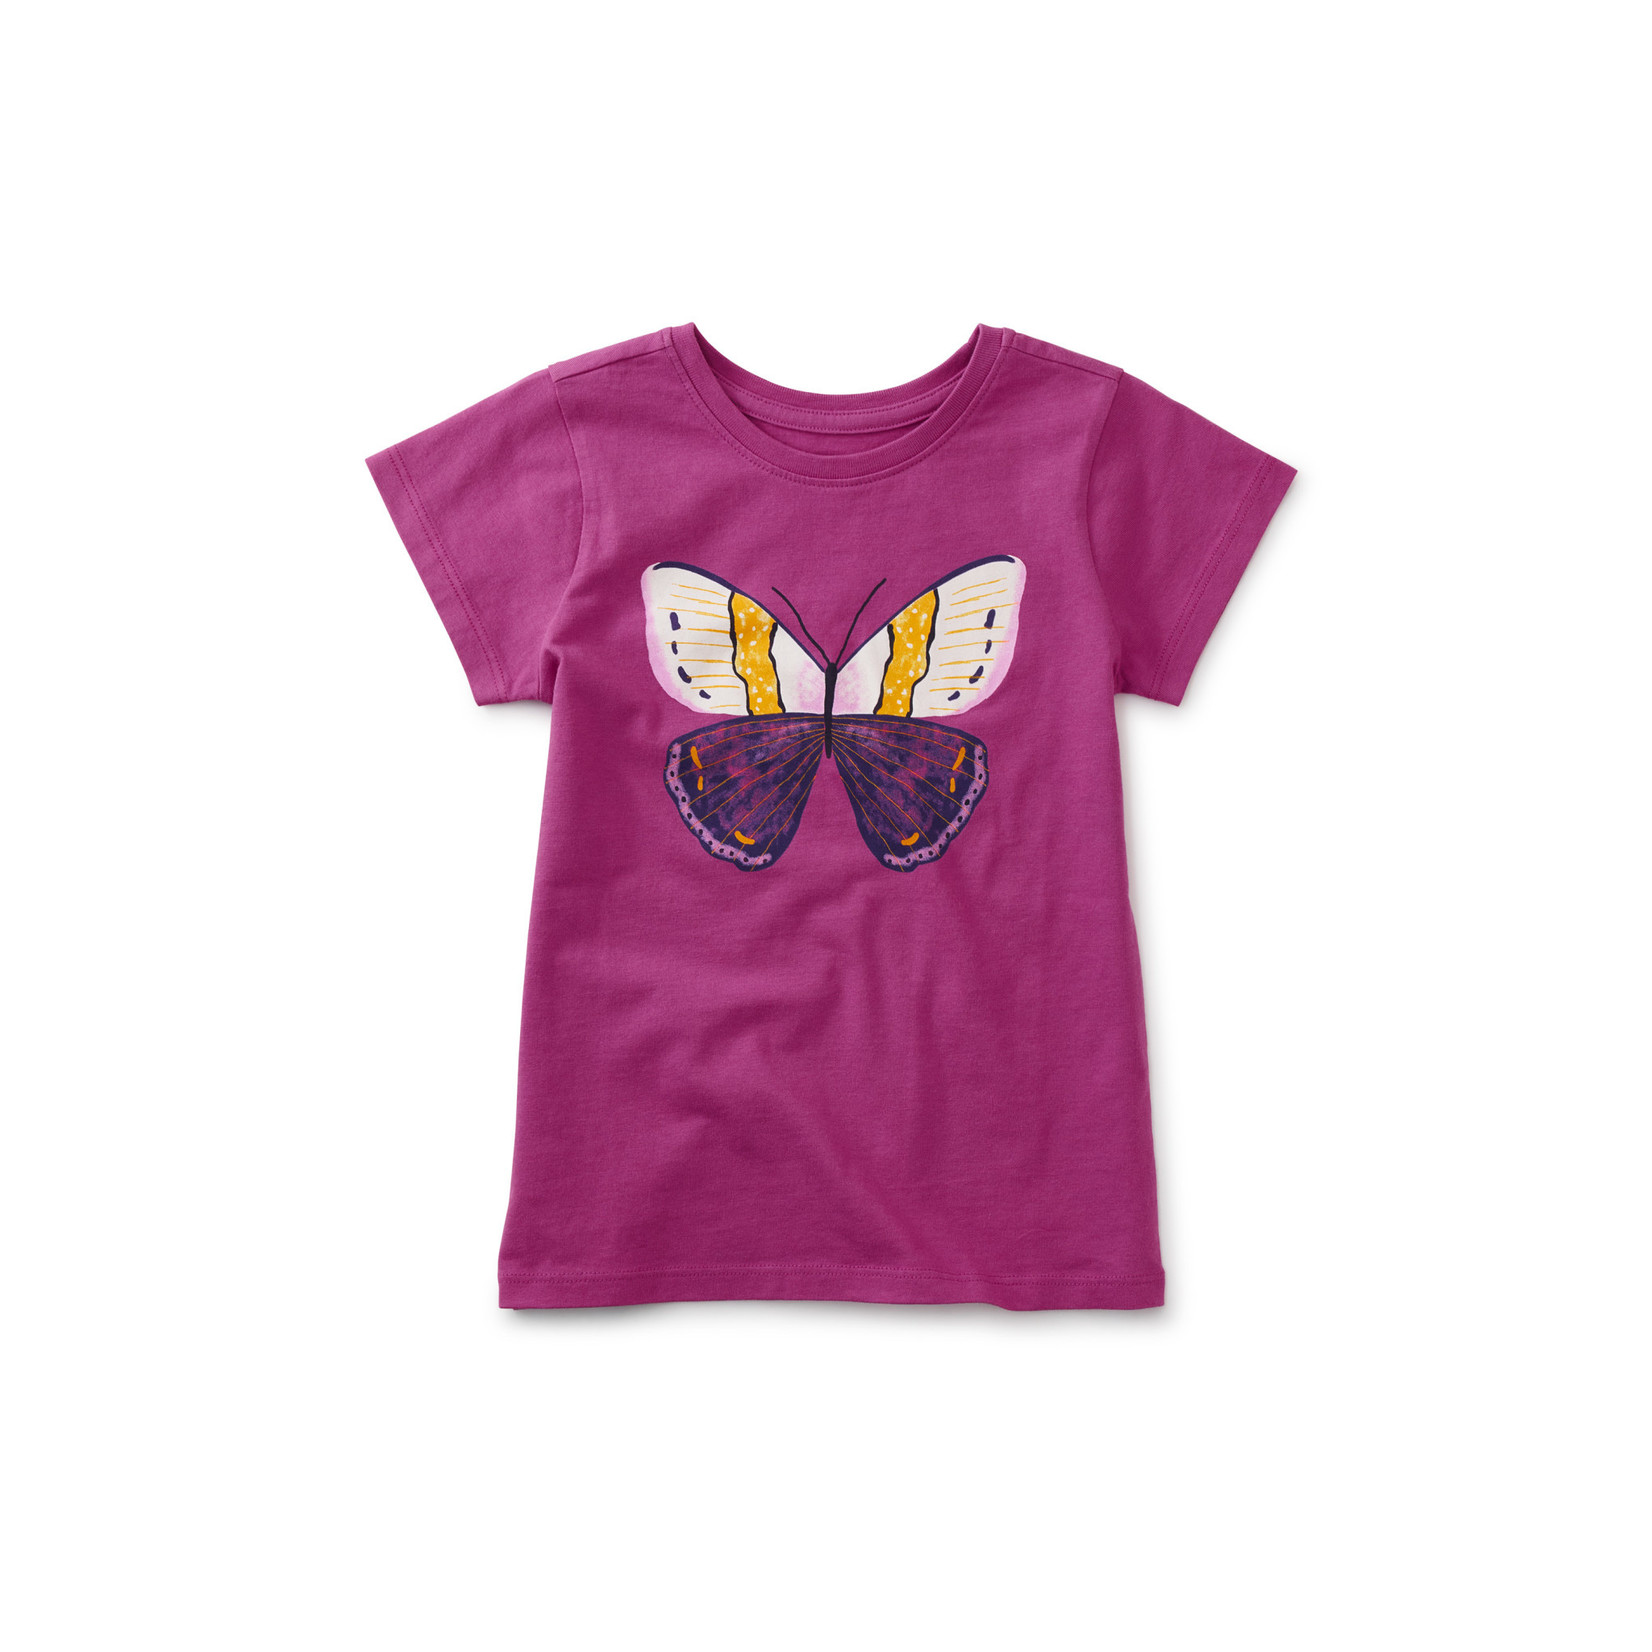 Tea Collection Beautiful Butterfly Tee - Mulberry + Triumph Solid Legging Set